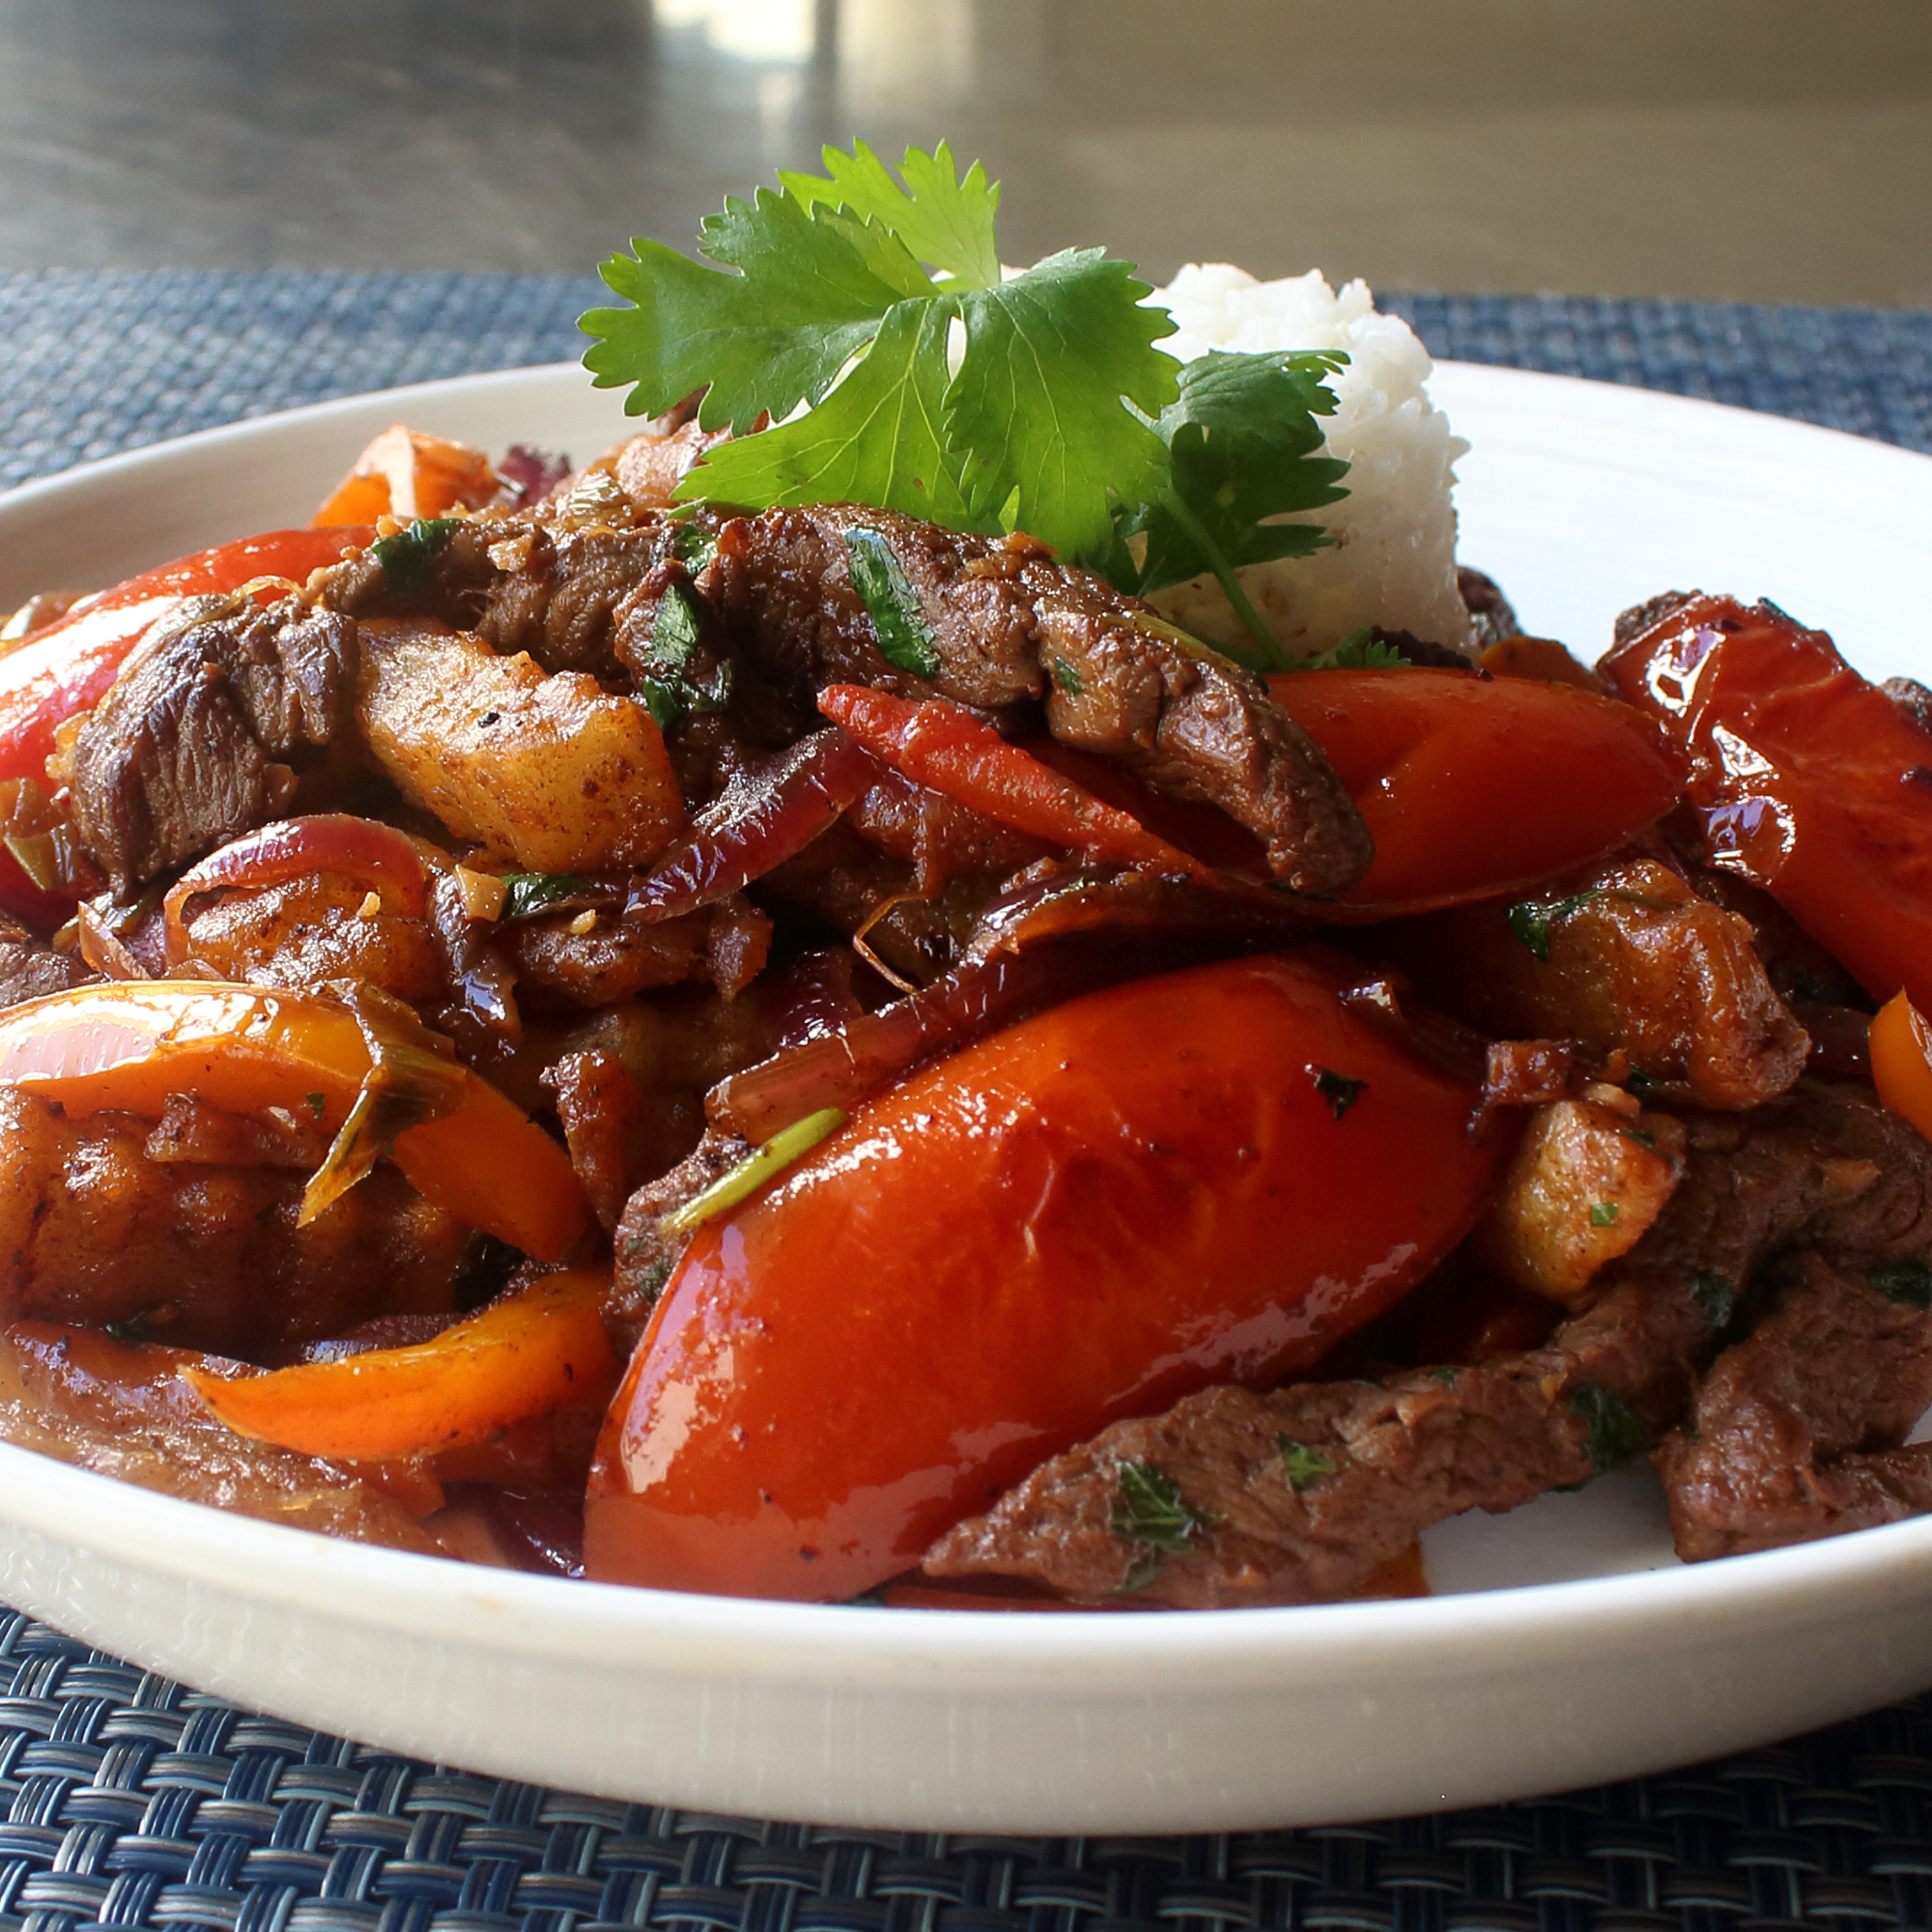 close up view of Lomo Saltado (Peruvian Steak Stir-Fry) with white rice and fresh herbs on a white plate